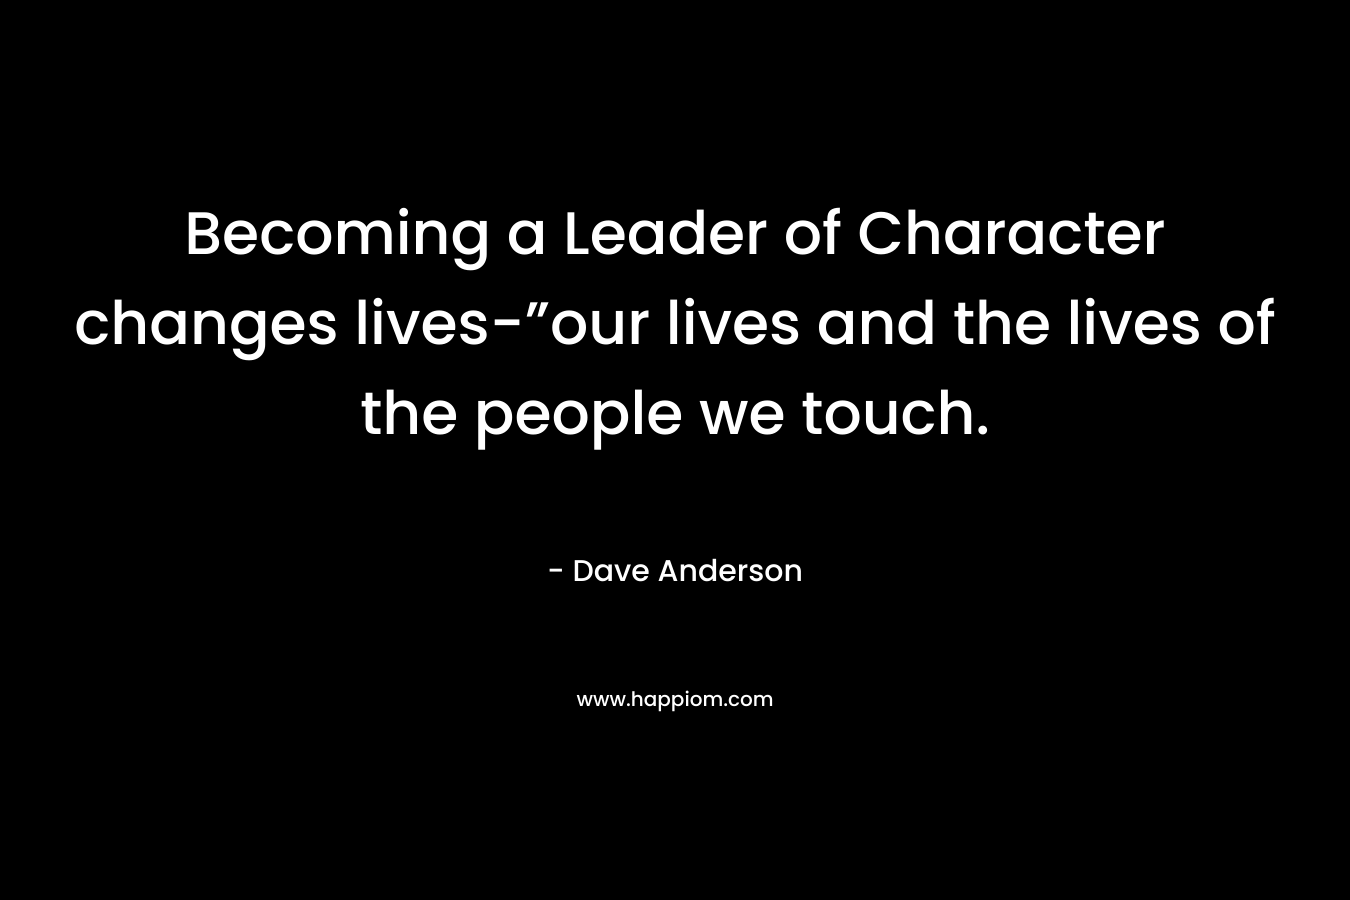 Becoming a Leader of Character changes lives-”our lives and the lives of the people we touch.